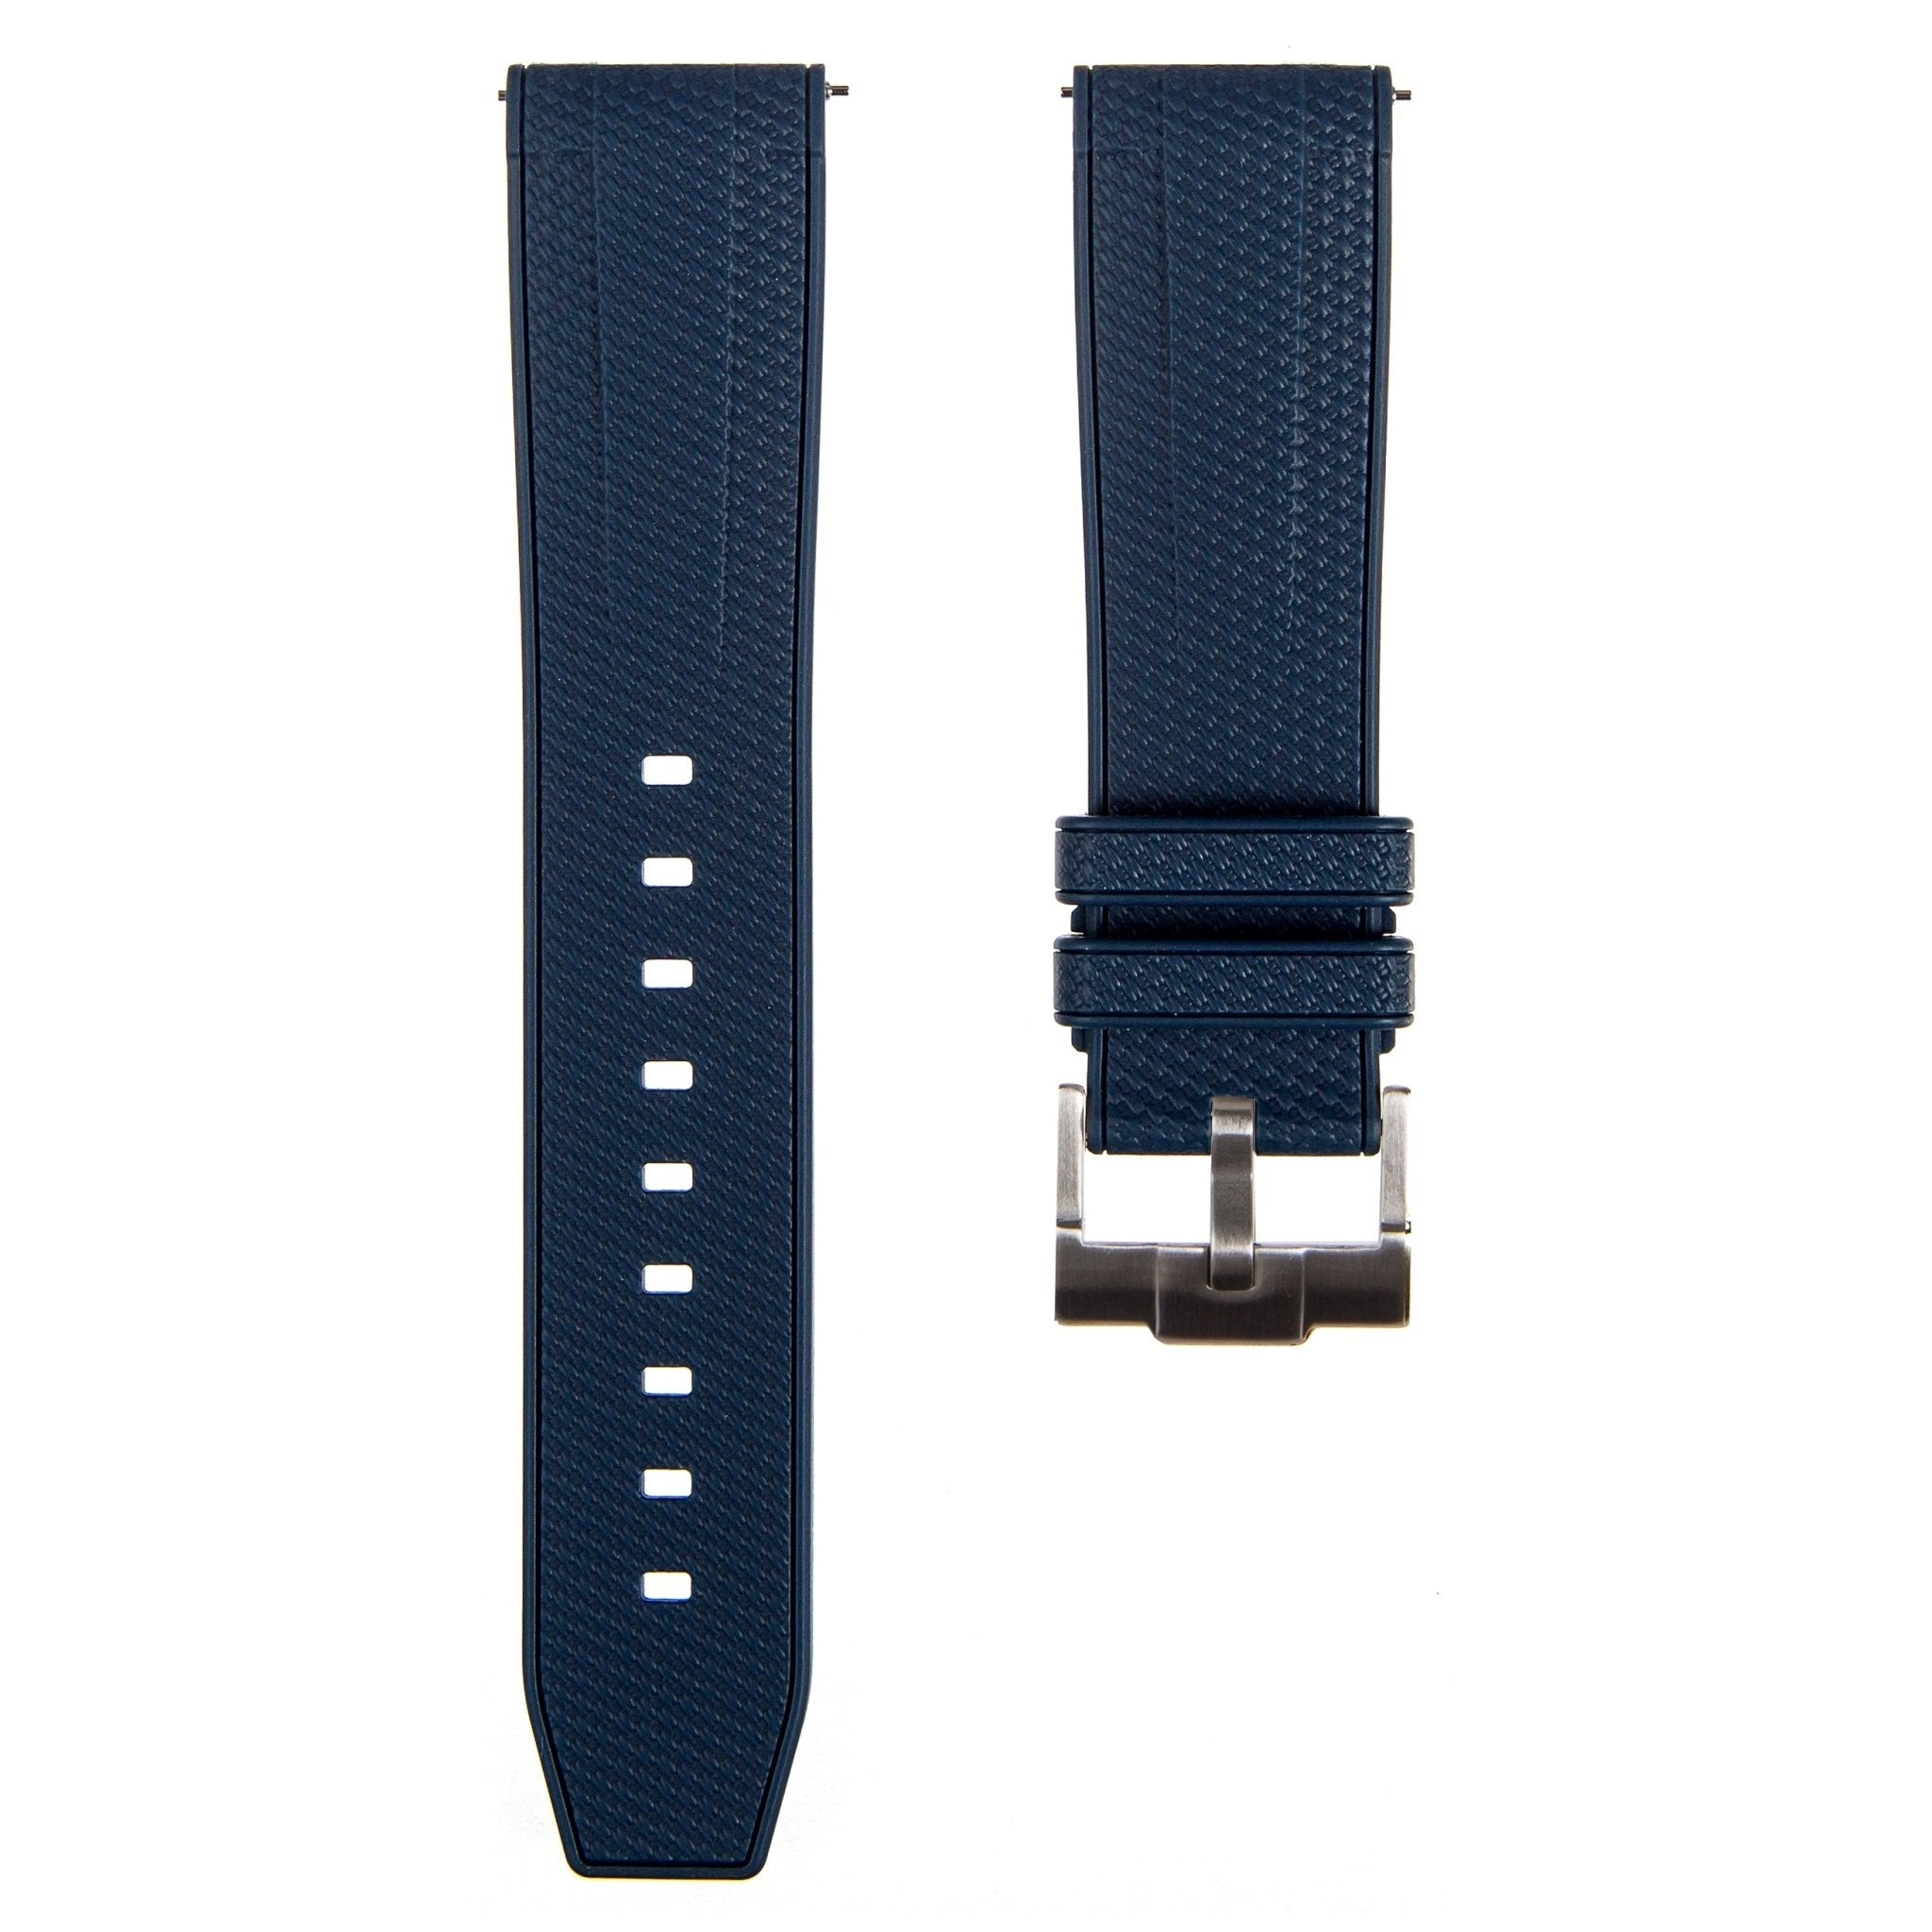 Flexweave Premium SIlicone Rubber Strap - Quick-Release - Compatible with Omega x Swatch – Navy (2423) -Strapseeker